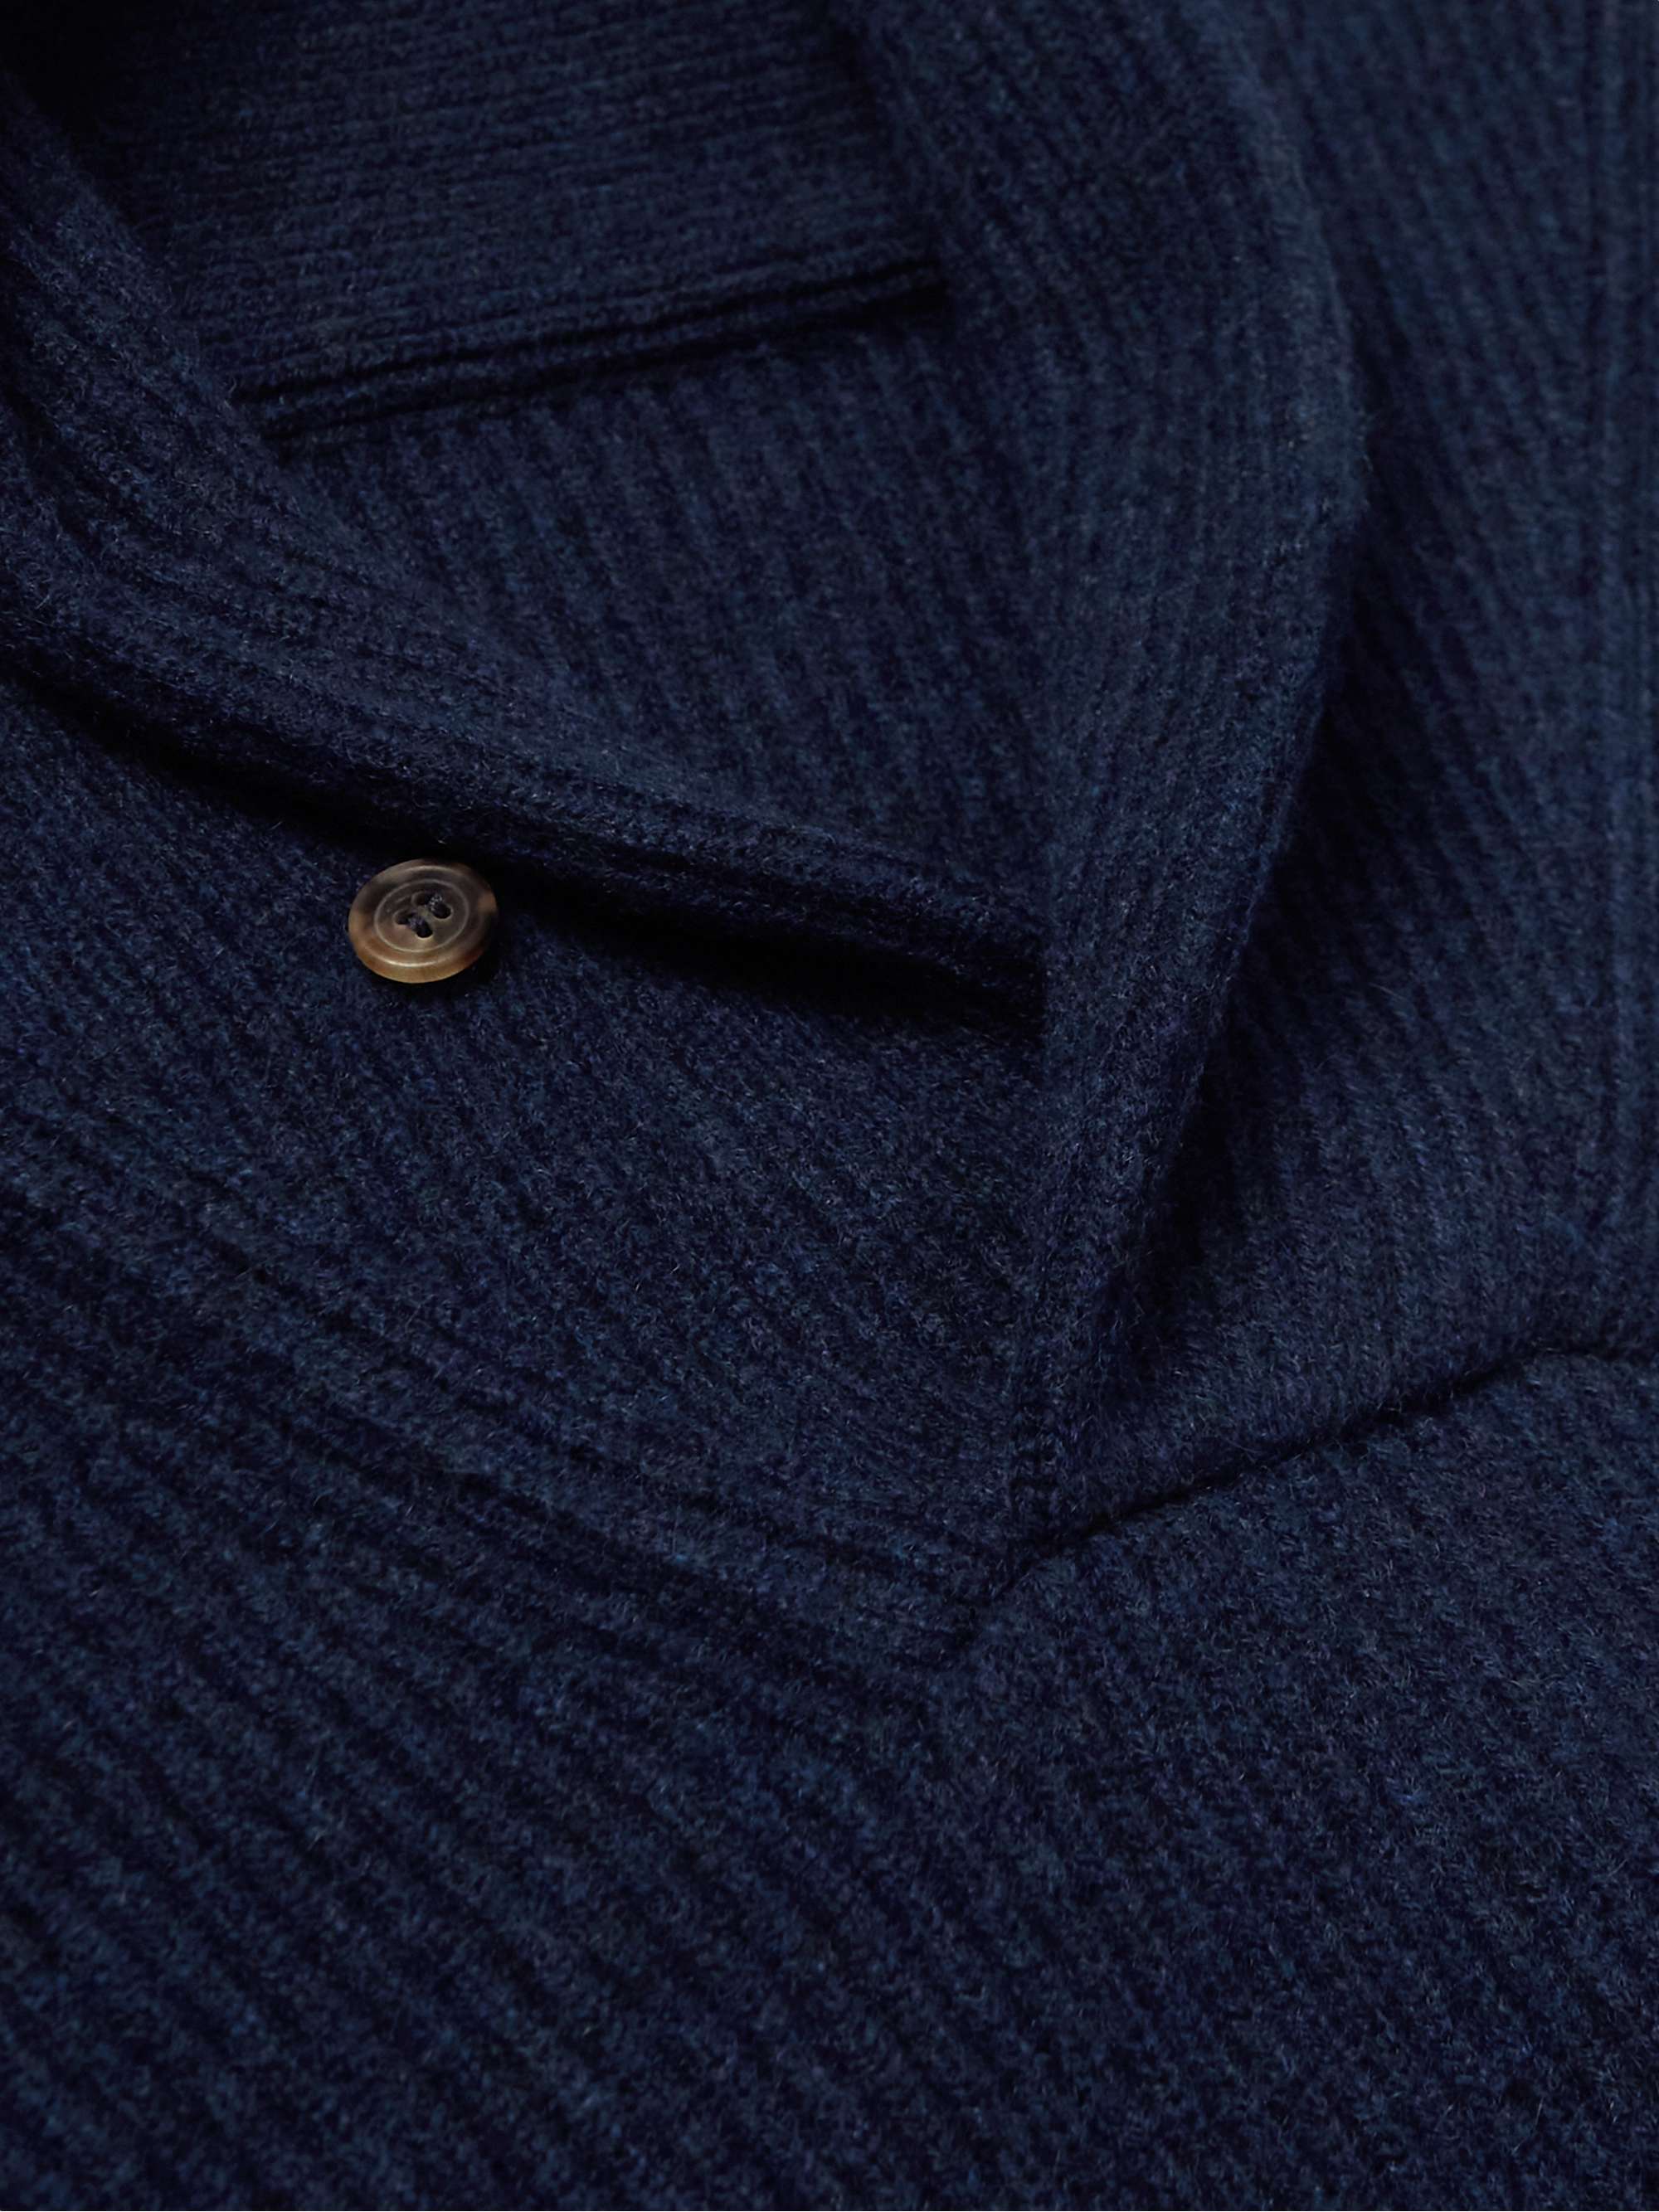 ANDERSON & SHEPPARD Shawl-Collar Ribbed Cashmere Sweater